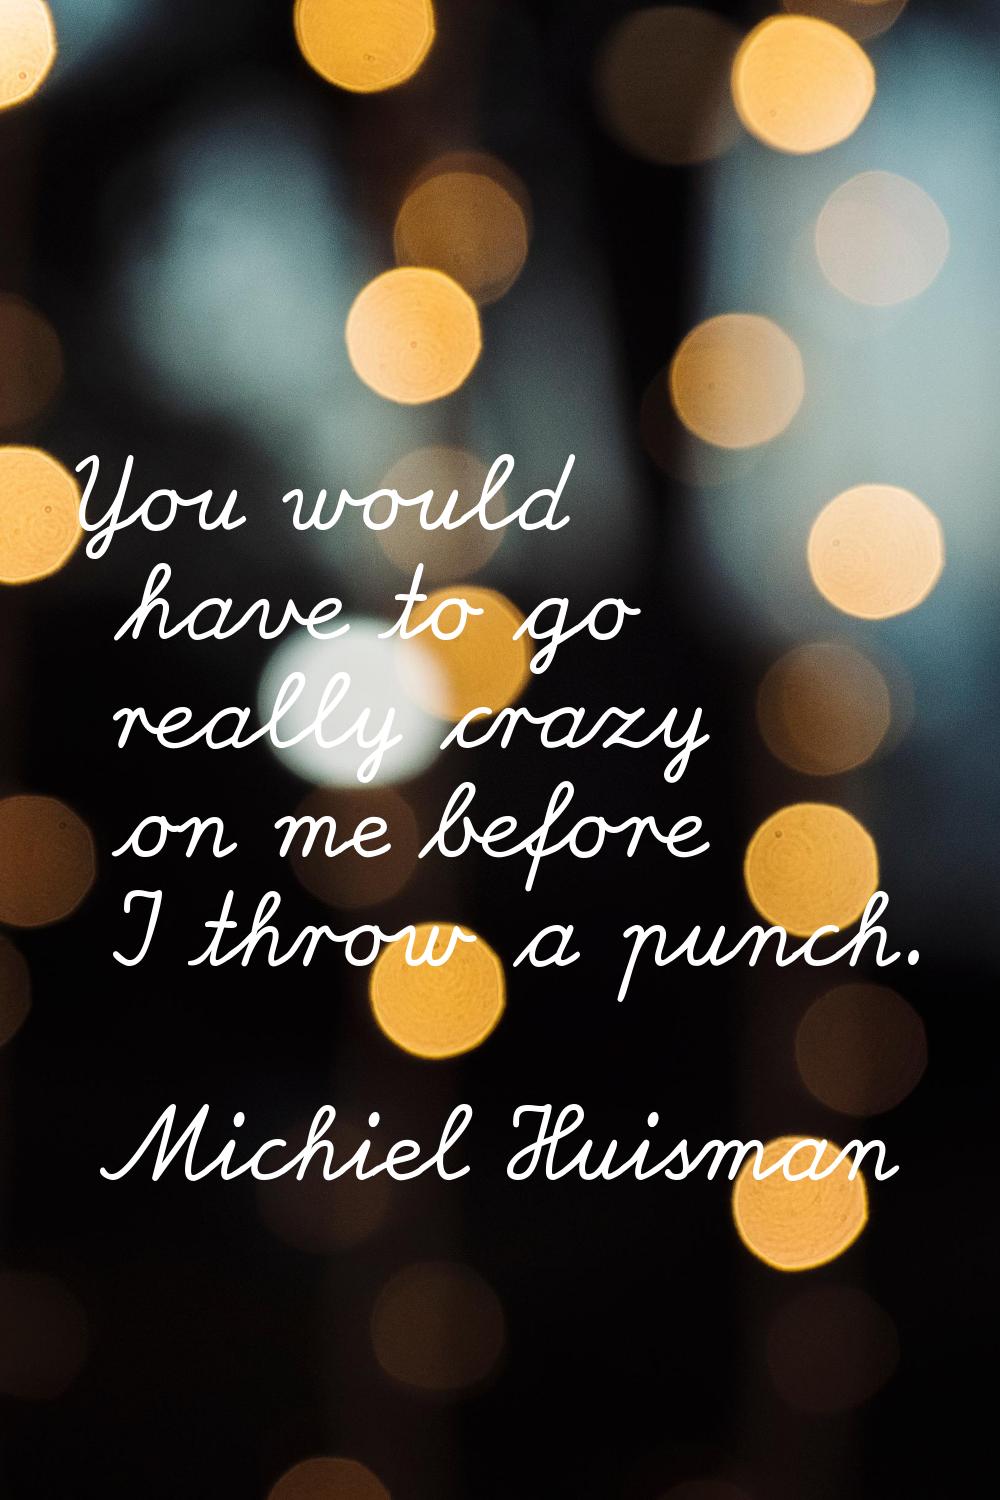 You would have to go really crazy on me before I throw a punch.